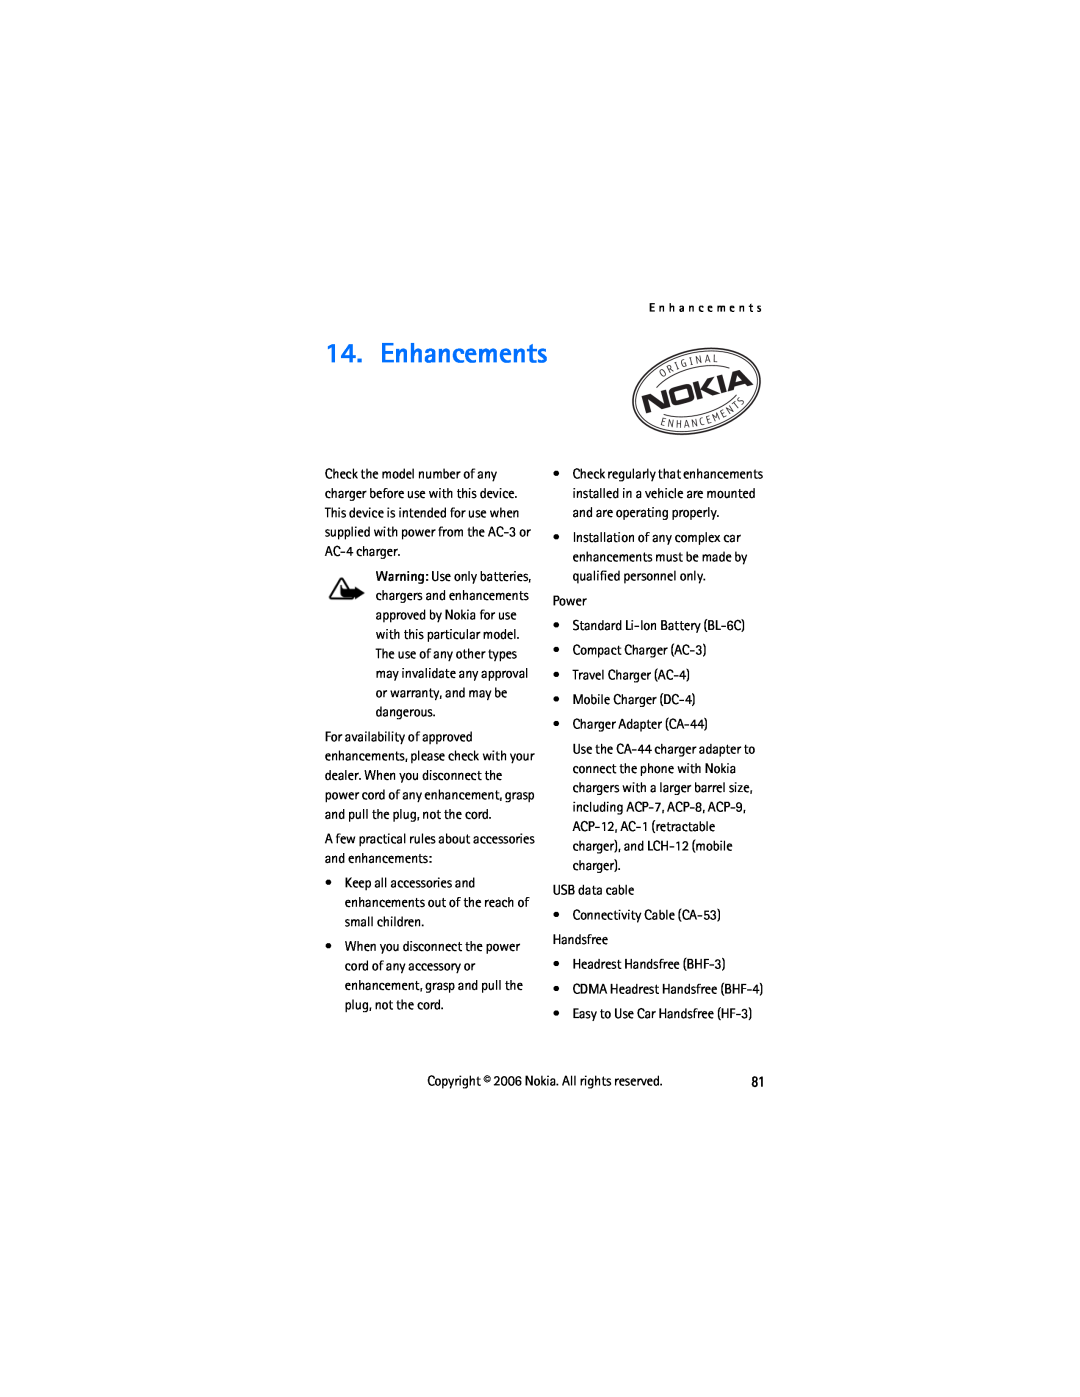 Nokia 2855 manual Enhancements, A few practical rules about accessories and enhancements, Easy to Use Car Handsfree HF-3 